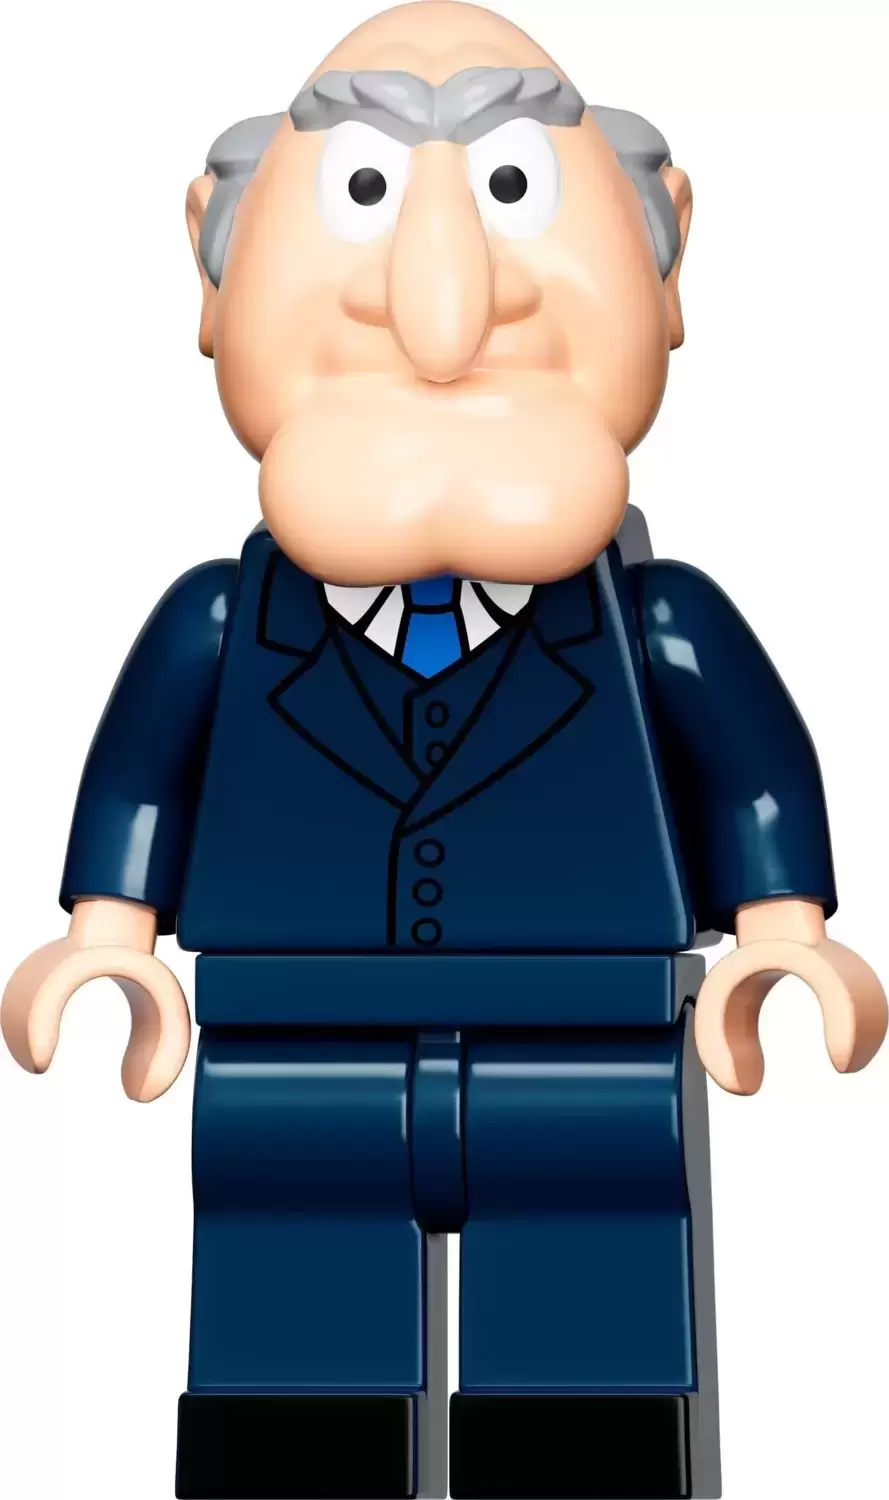 LEGO The Muppets Minifigures - Statler